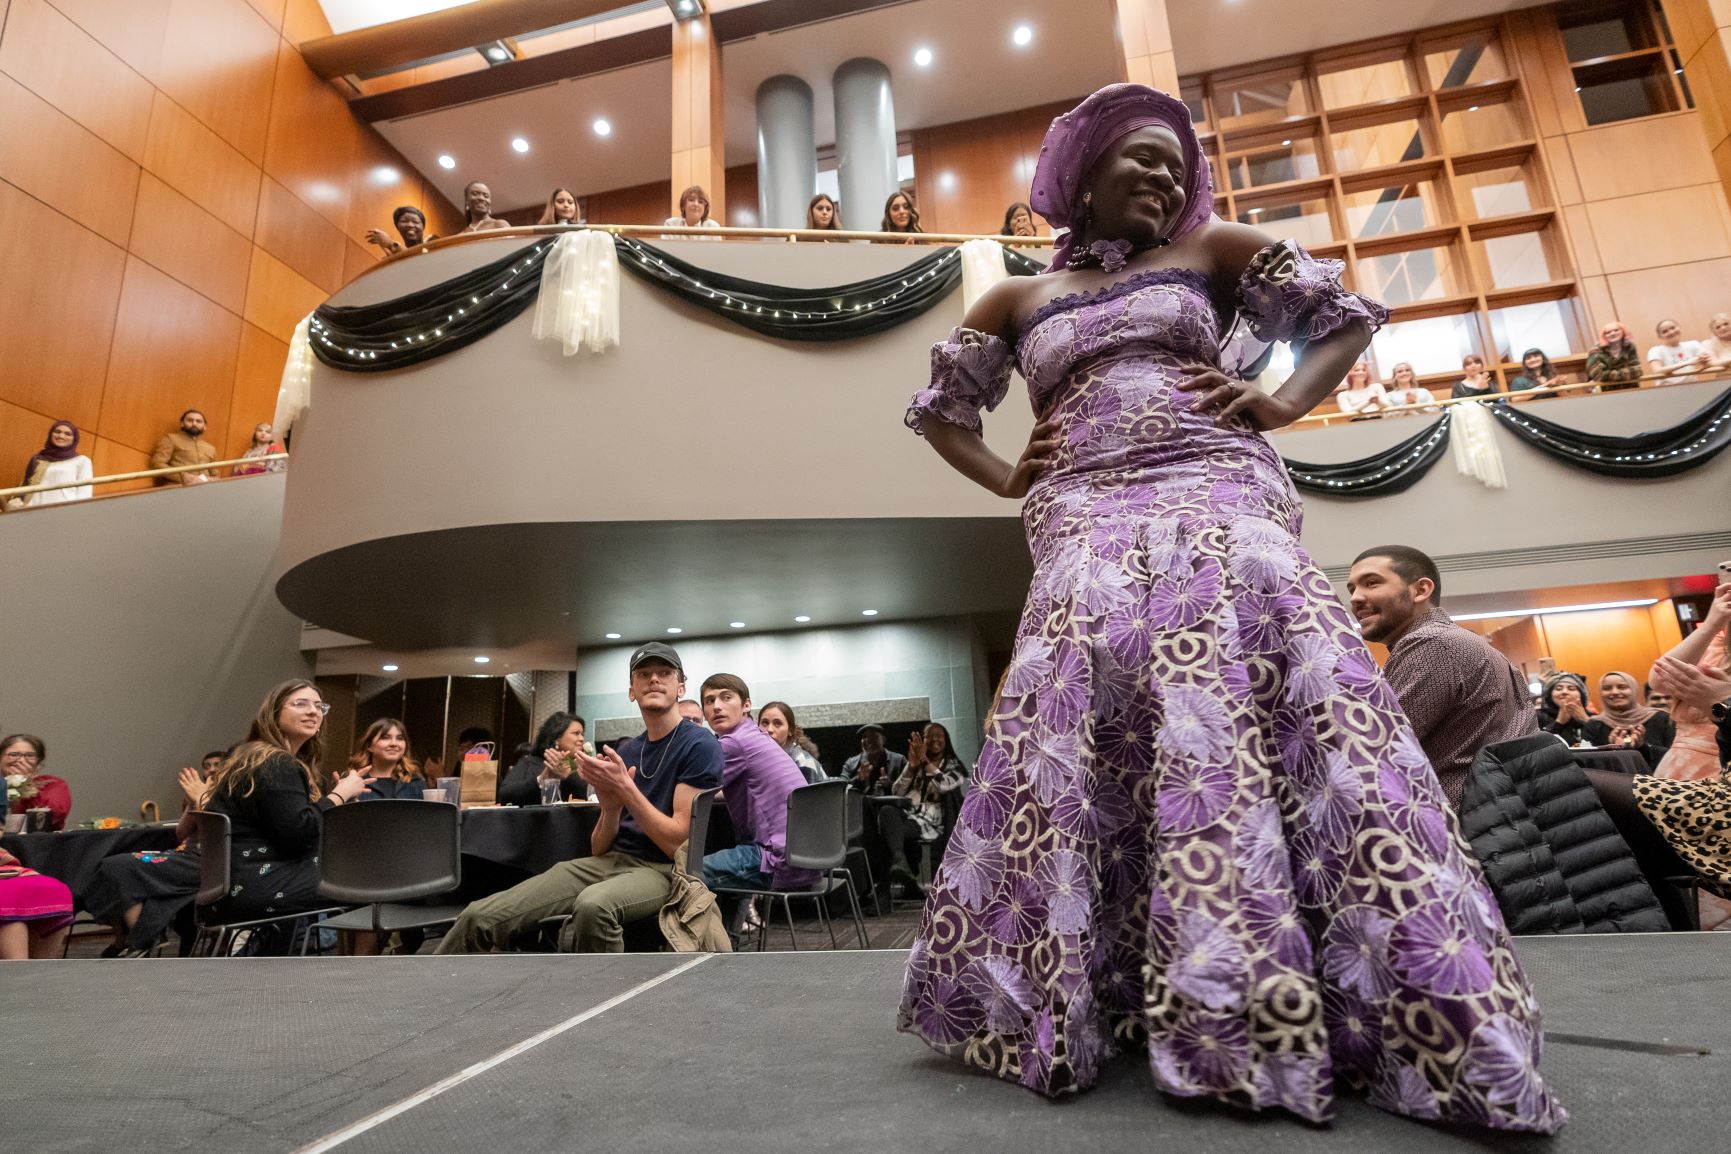 Hosted at the Wick Alumni Center, the highlight of Global Glam included 40 students modeling traditional clothing from their country as well as clothing from student designers and local retailers.